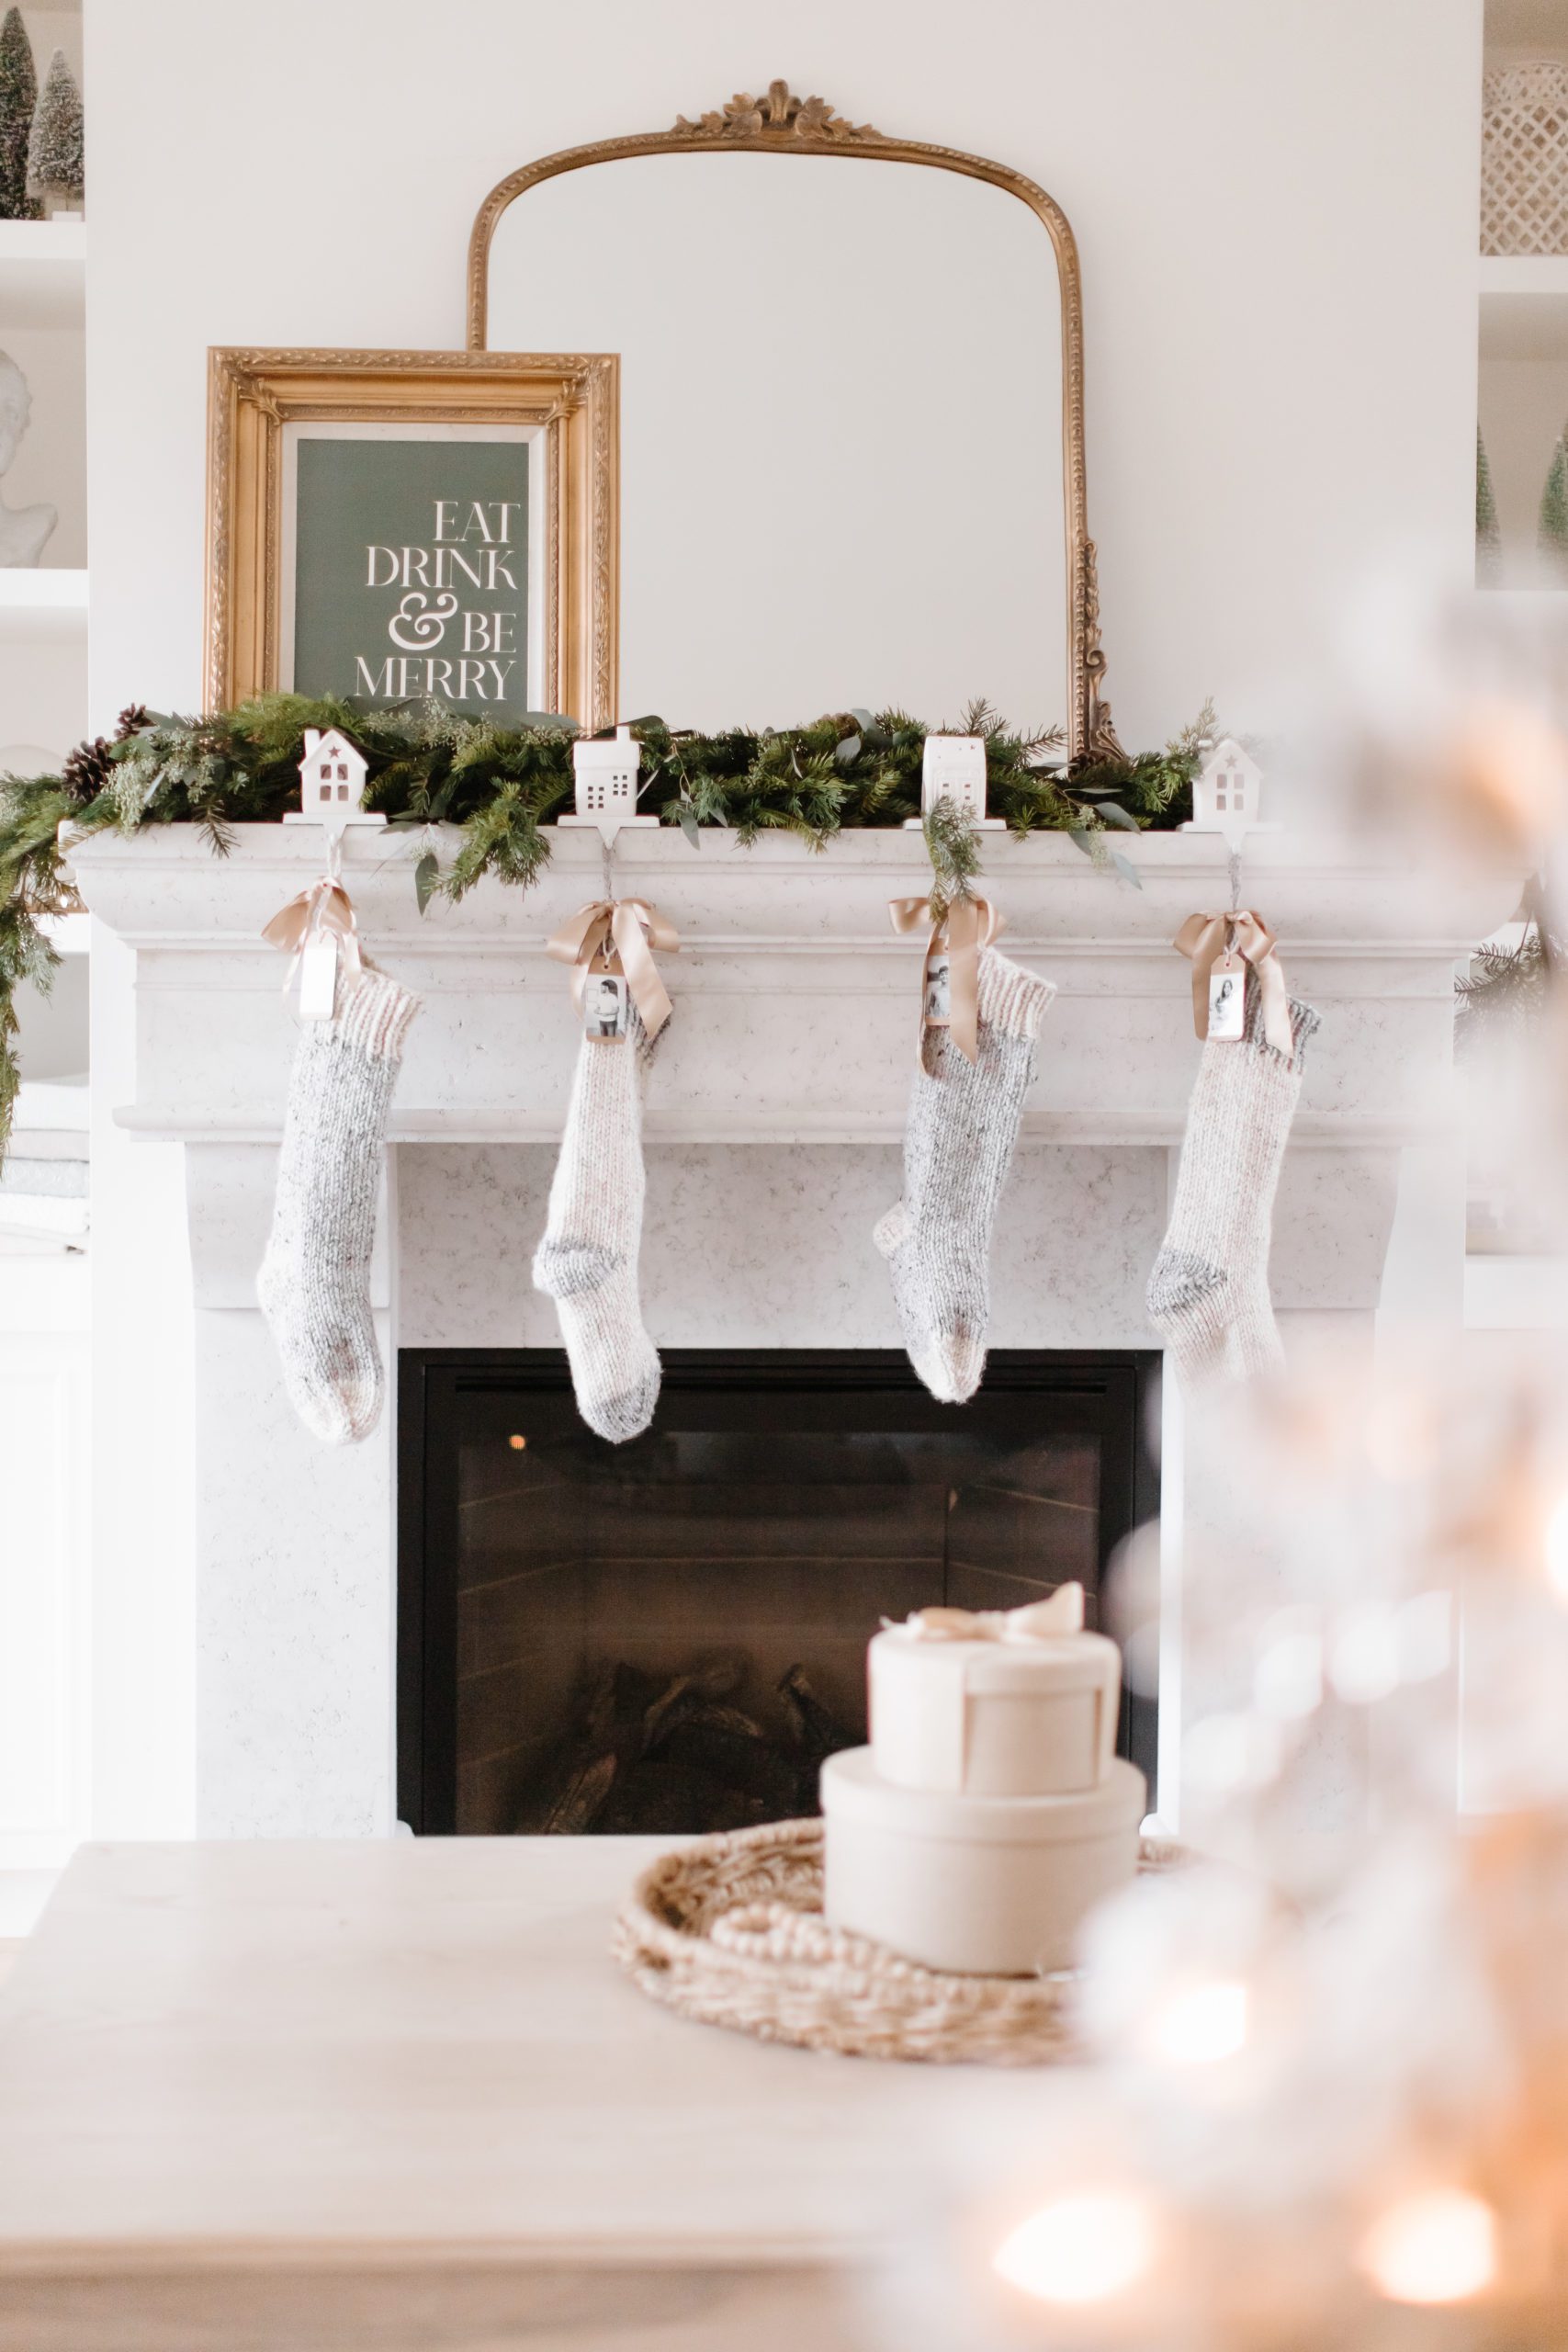 Christmas stockings tied with ribbon hanging on the mantle